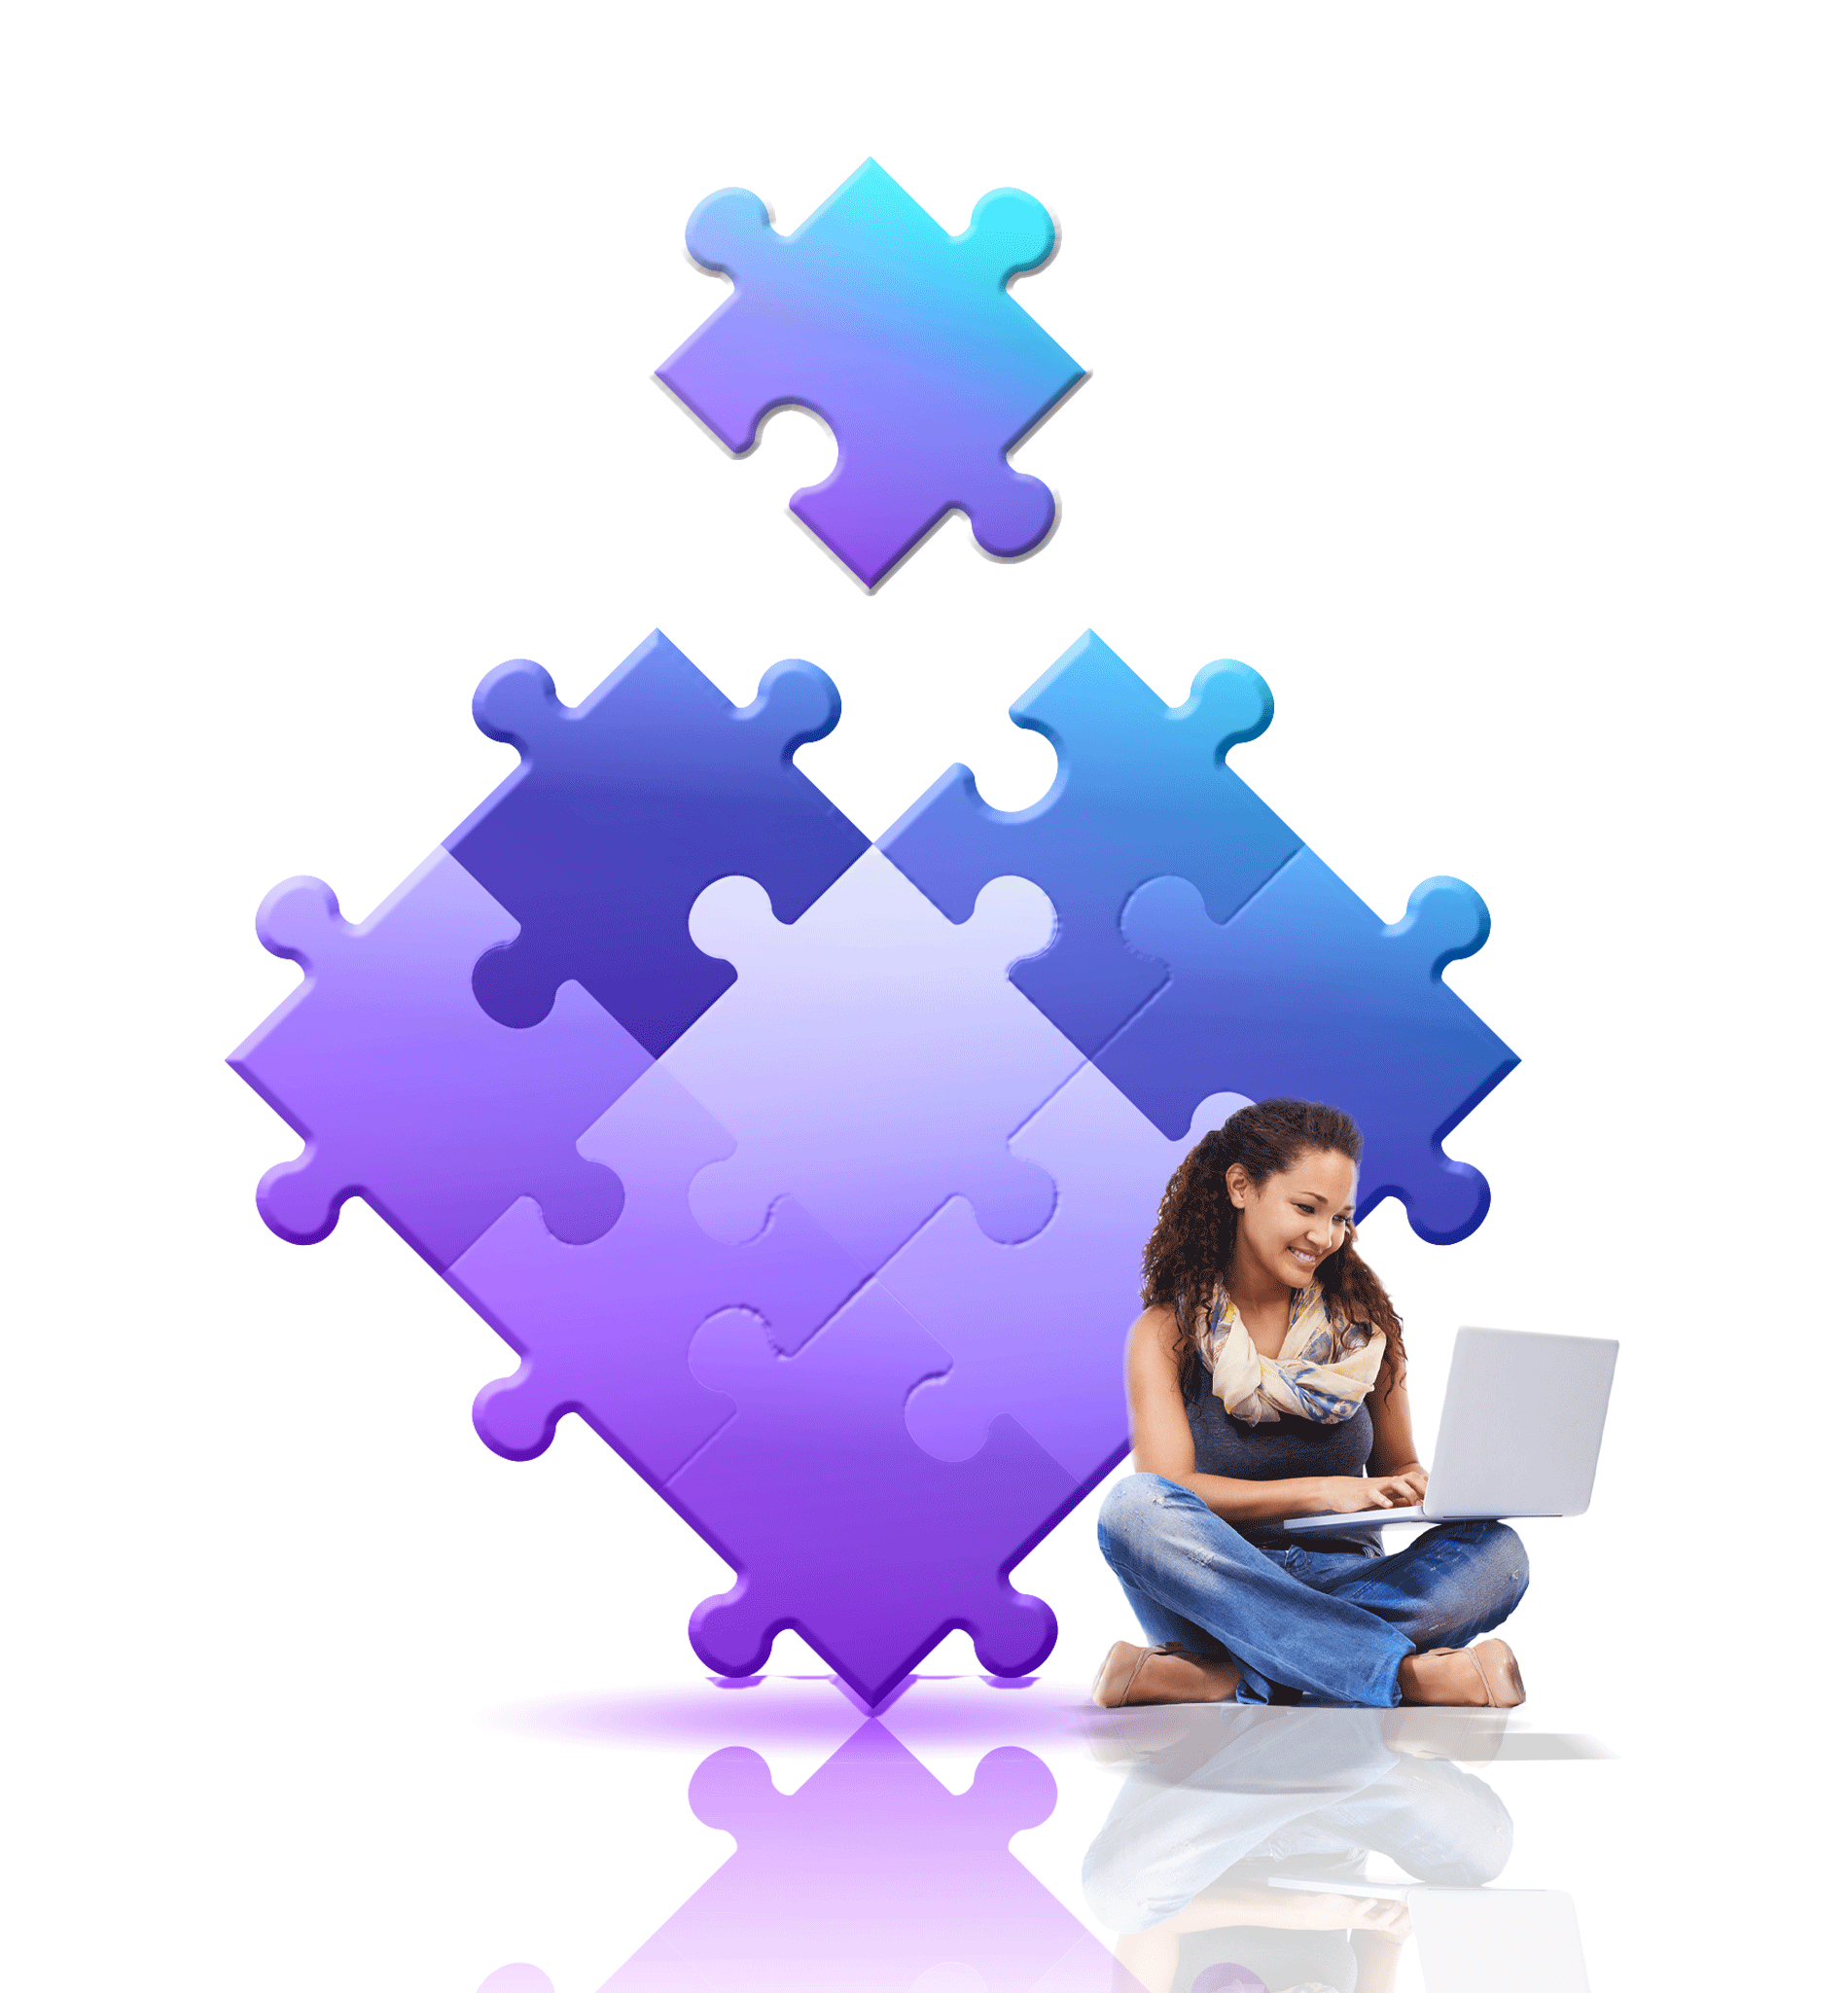 person-working-in-front-of-heart-shaped-puzzle-pieces (1)